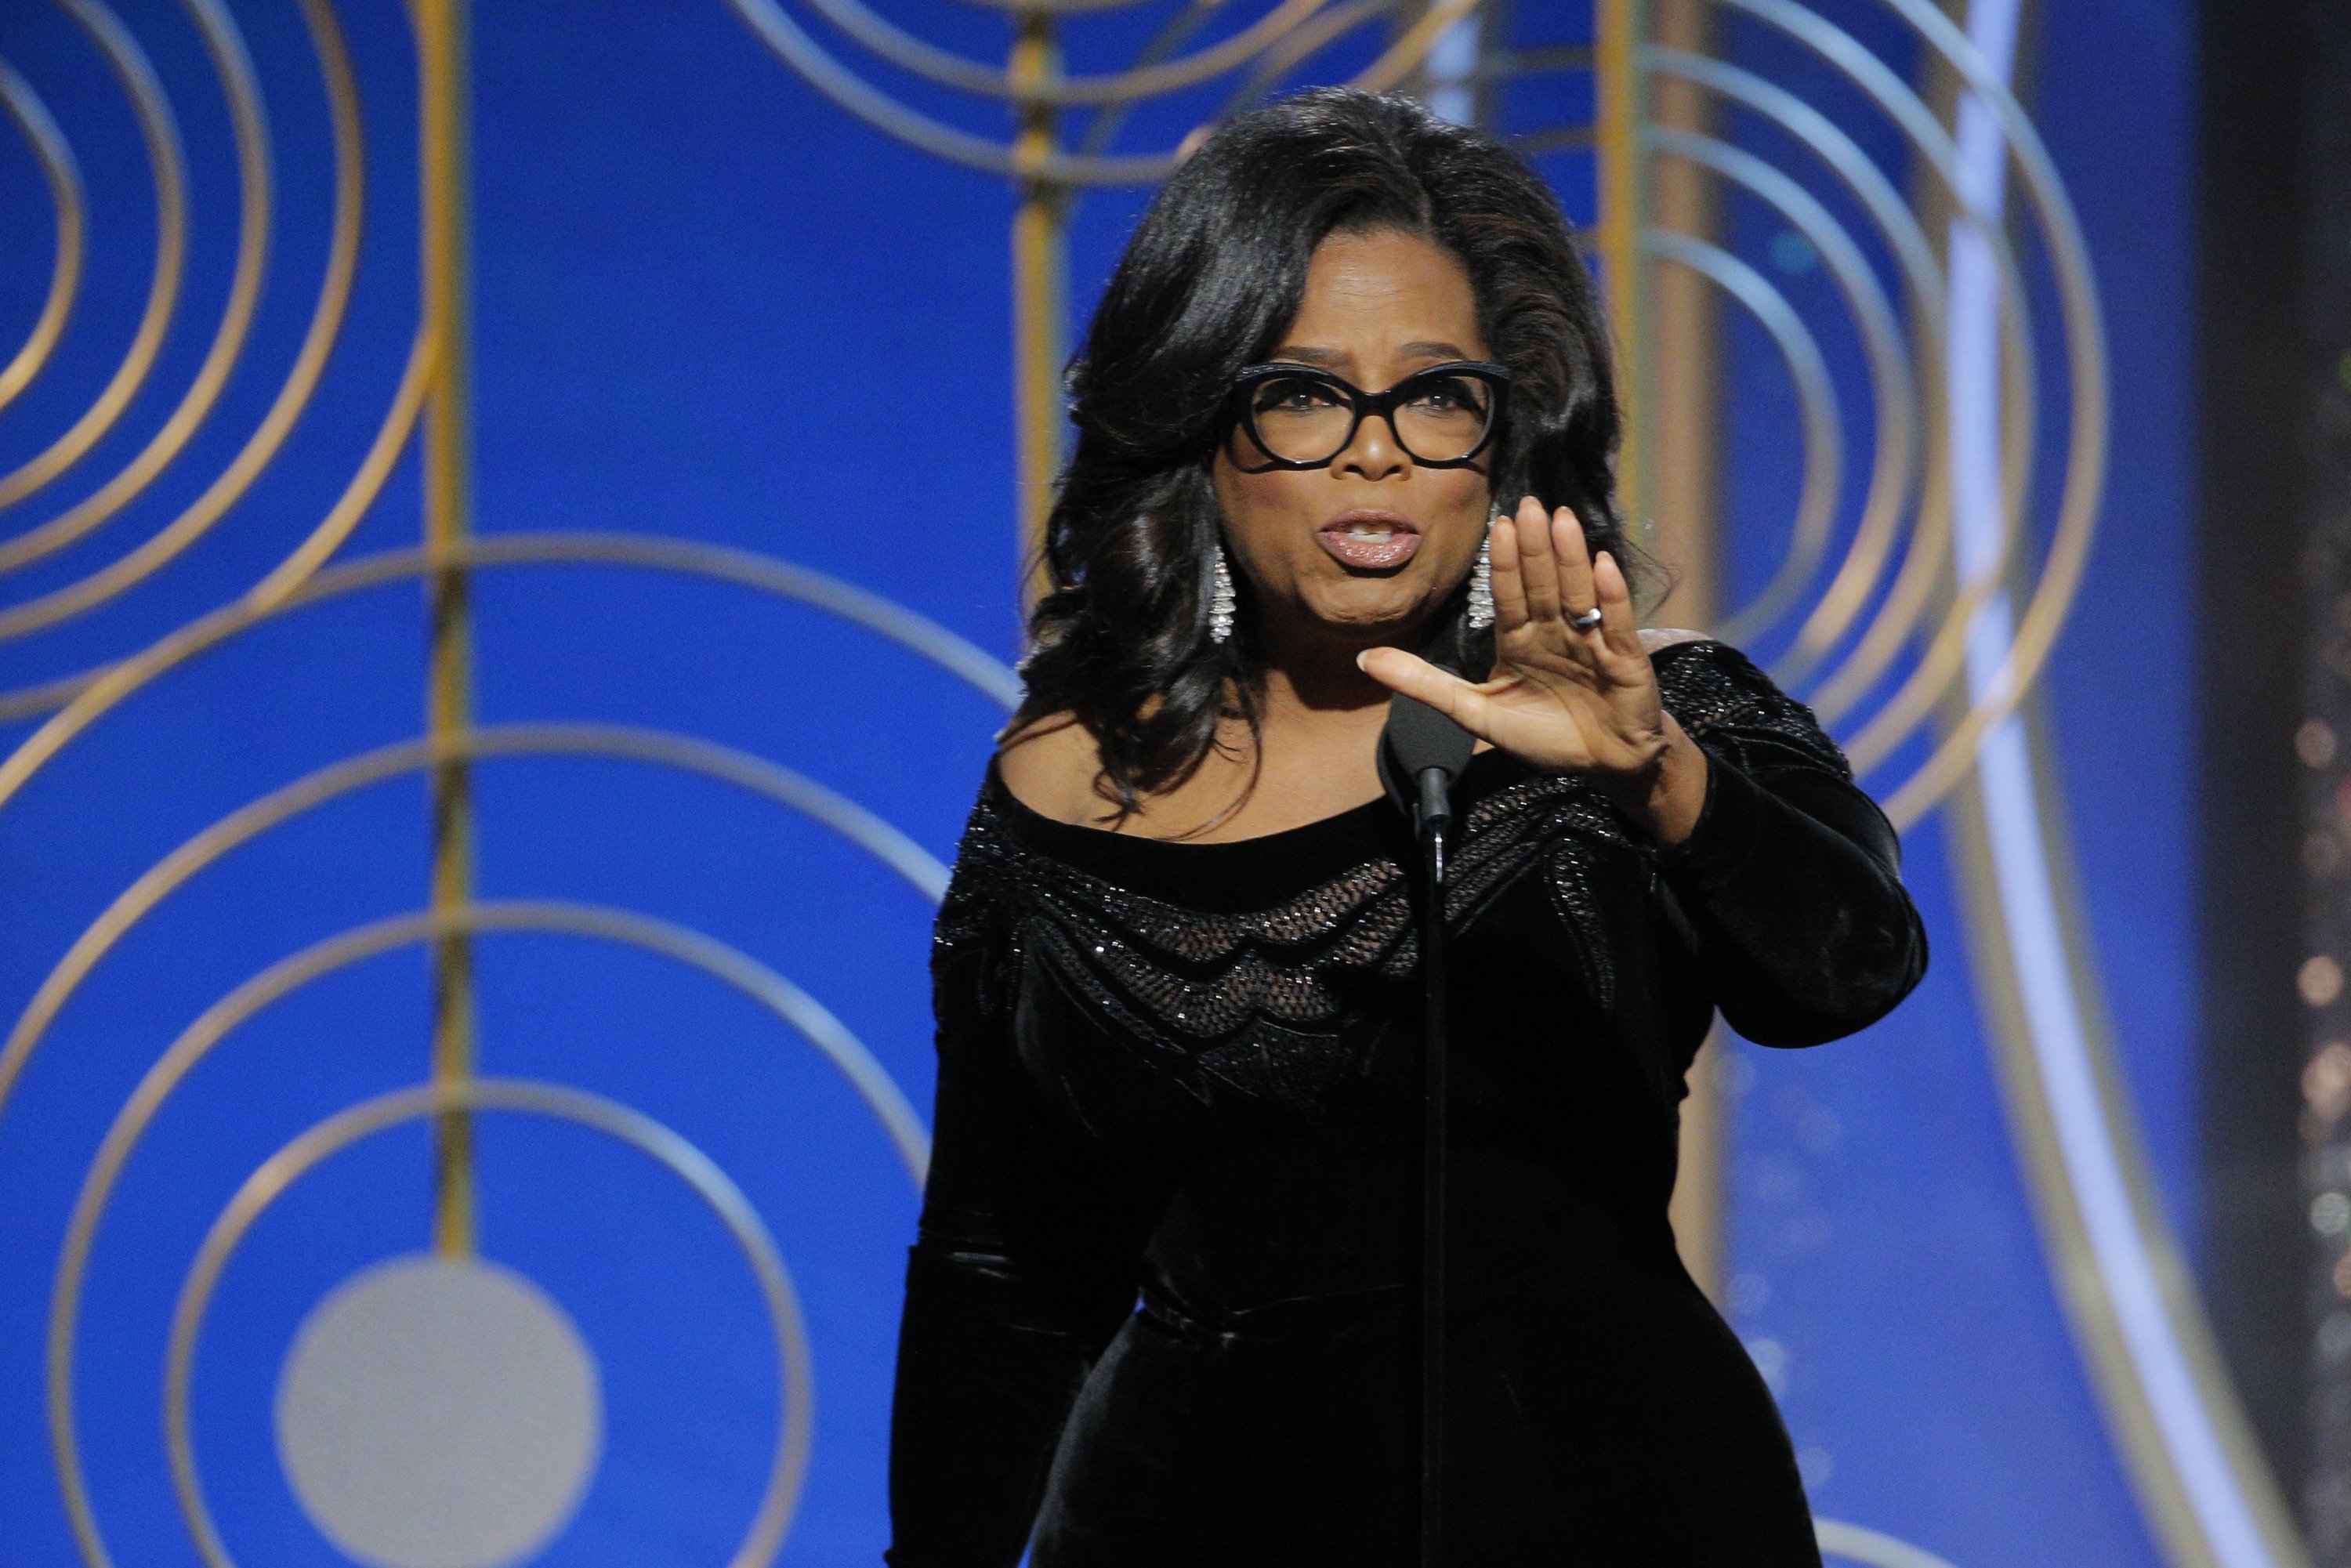 Oprah Winfrey accepting her 2018 Cecil B. DeMille Award during the 75th Golden Globe Awards. | Photo: Getty Images